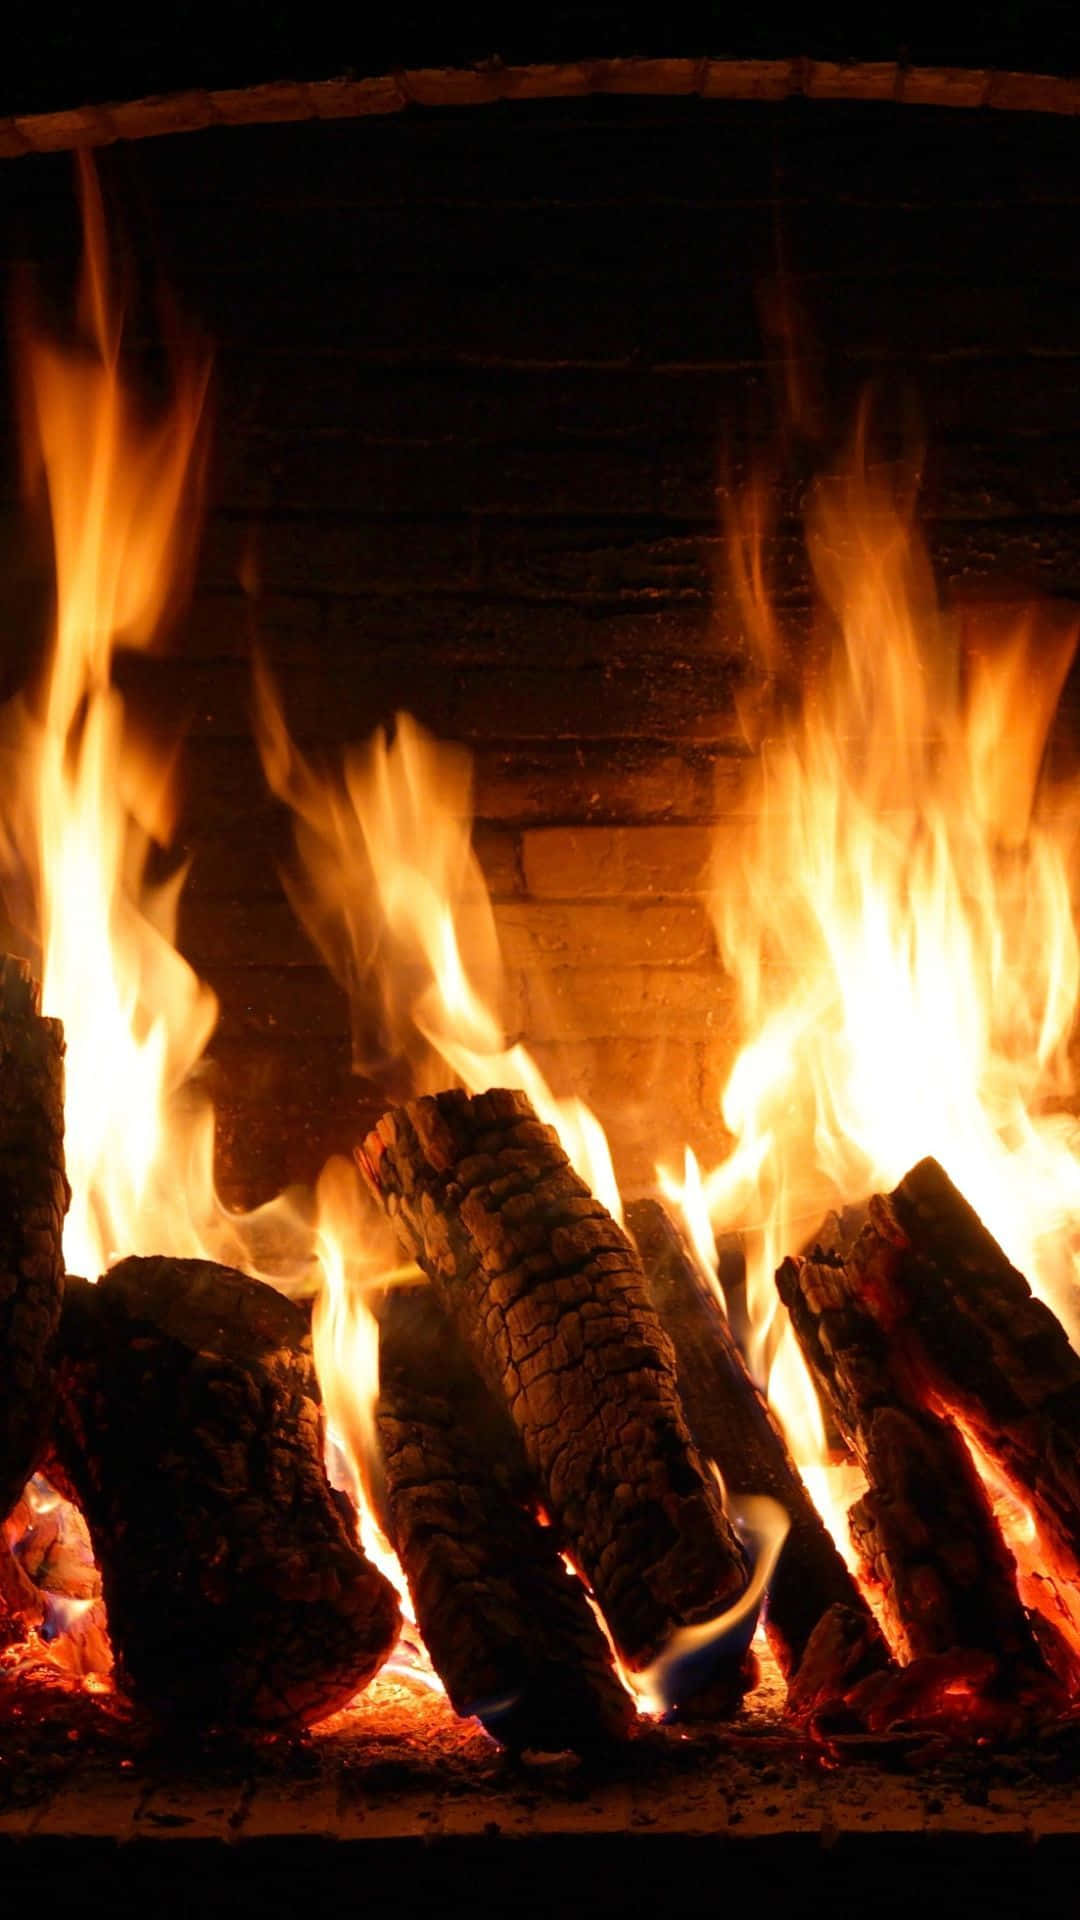 Ignite the Warmth - Cozy Fire in a Fireplace Wallpaper